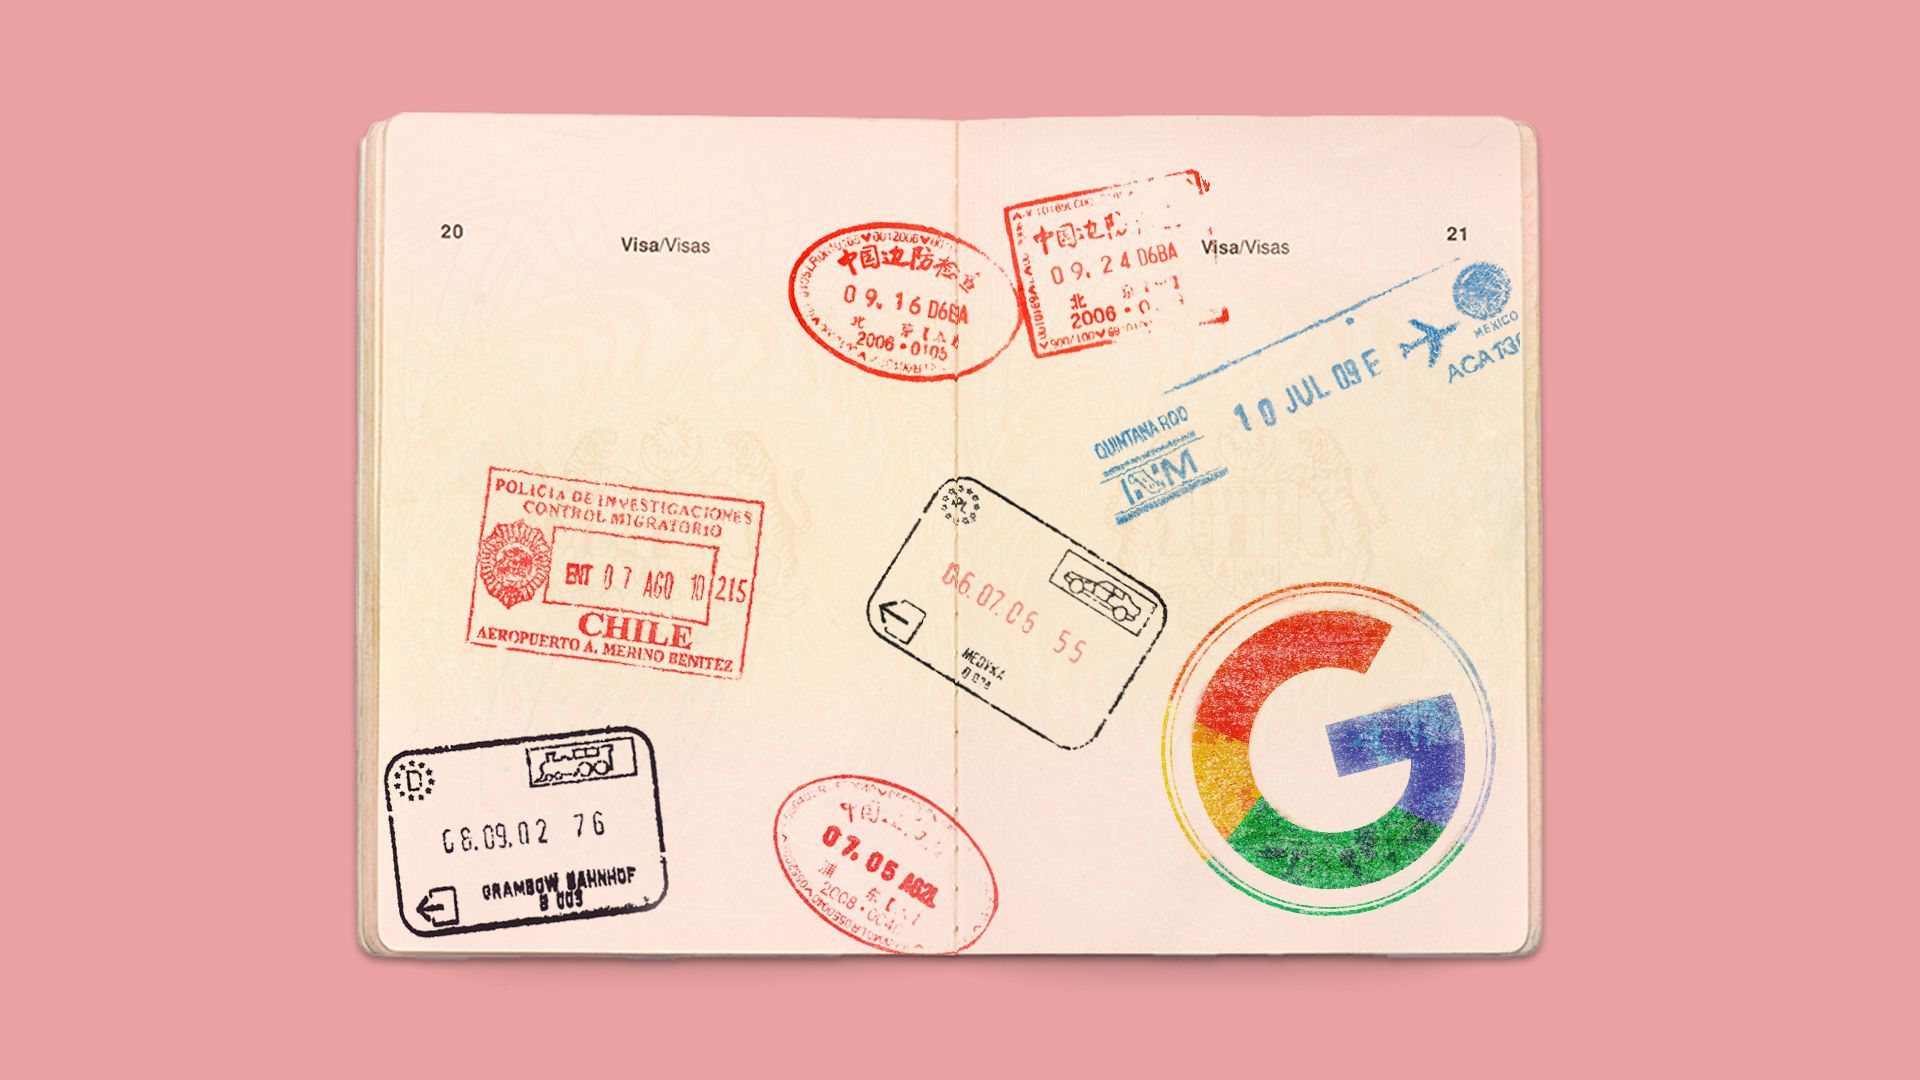 Illustration of a passport with various stamps including the google logo